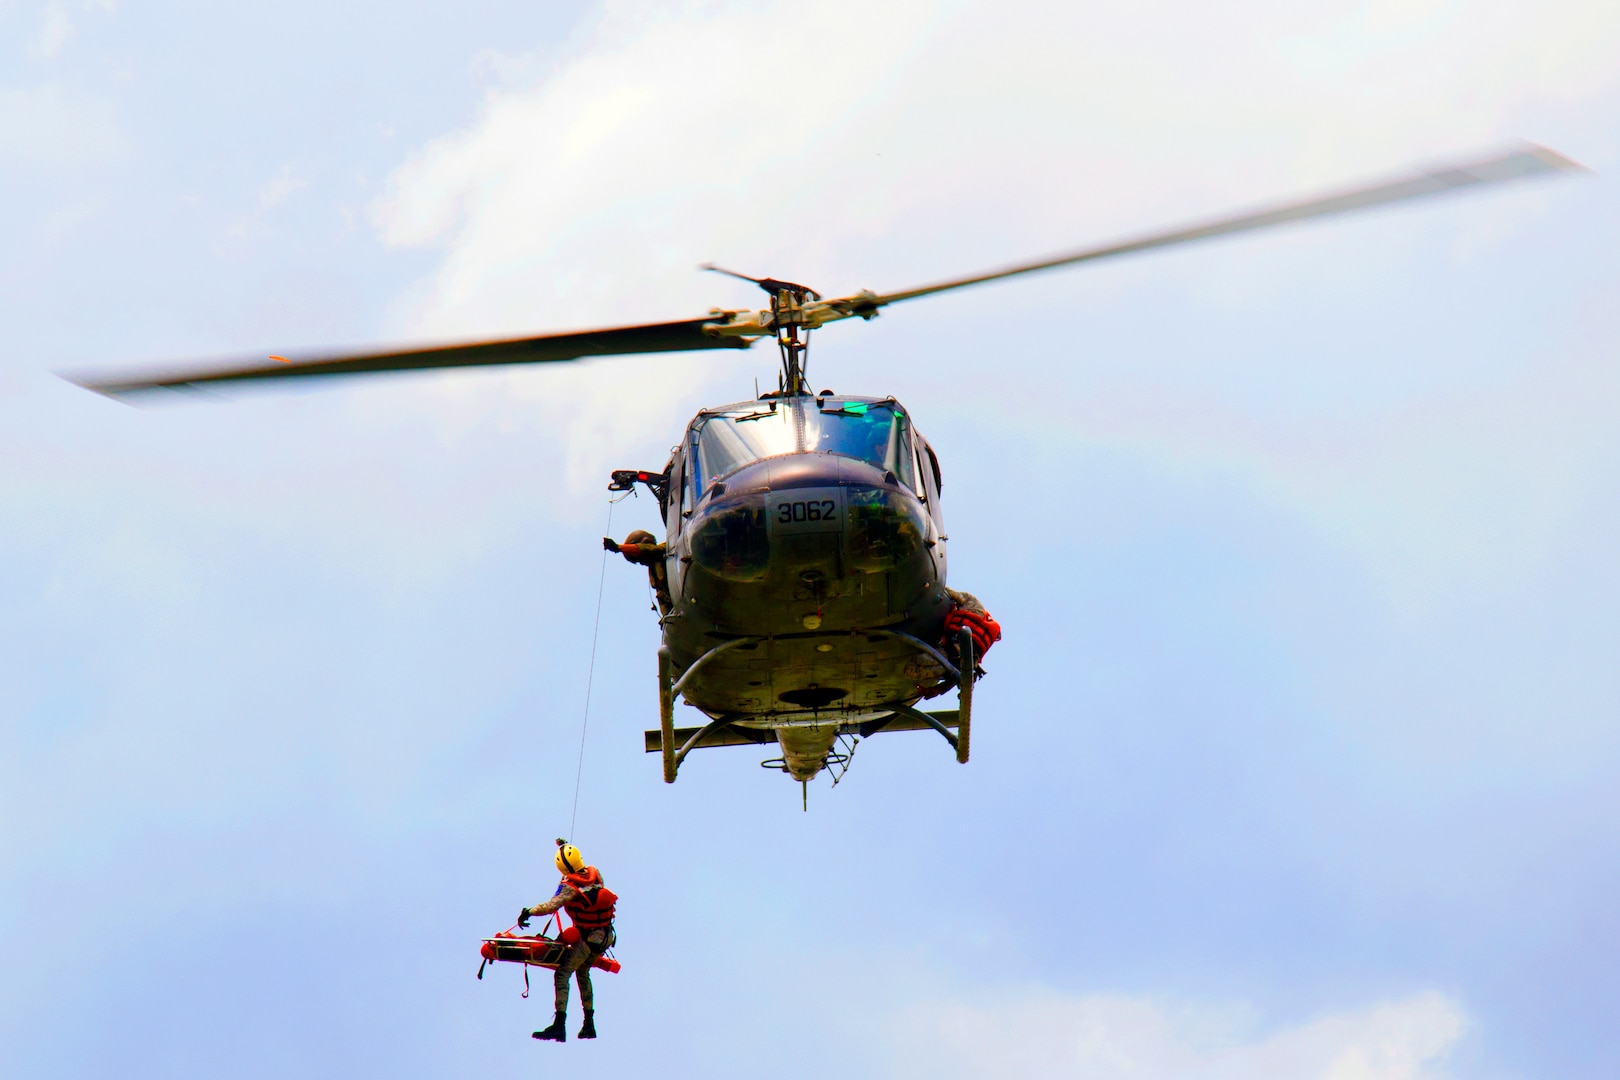 Dominican Republic Civil Defense, Air Force search and rescue squadron, Army and other governmental and non-governmental organizations participated in water-rescue simulations as part of Fuerzas Aliadas Humanitarias 2019.